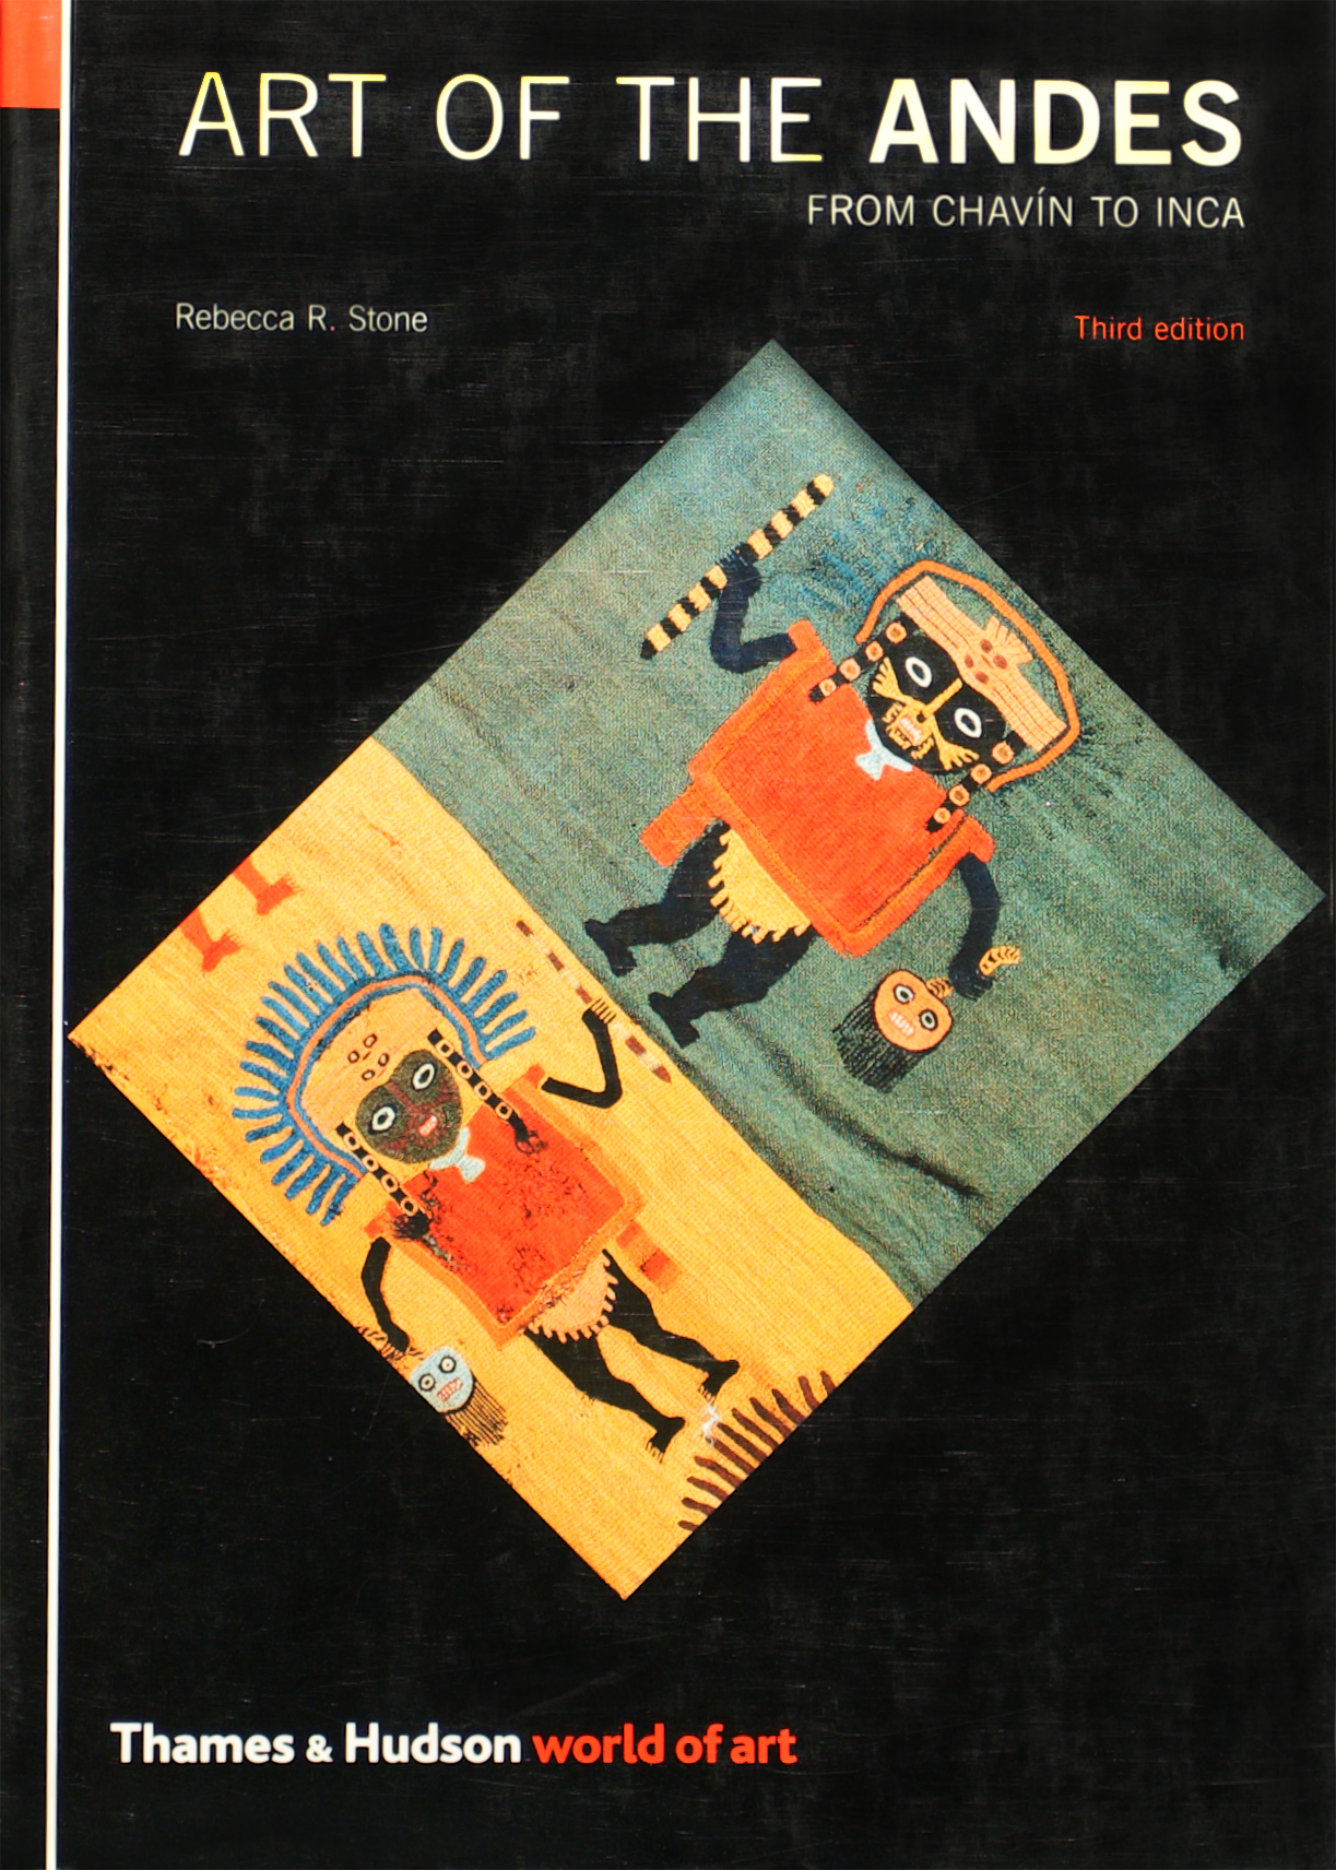 ART OF THE ANDES: FROM CHAVÍN TO INCA 3RD EDITION (WORLD OF ART, THAMES & HUDSON)